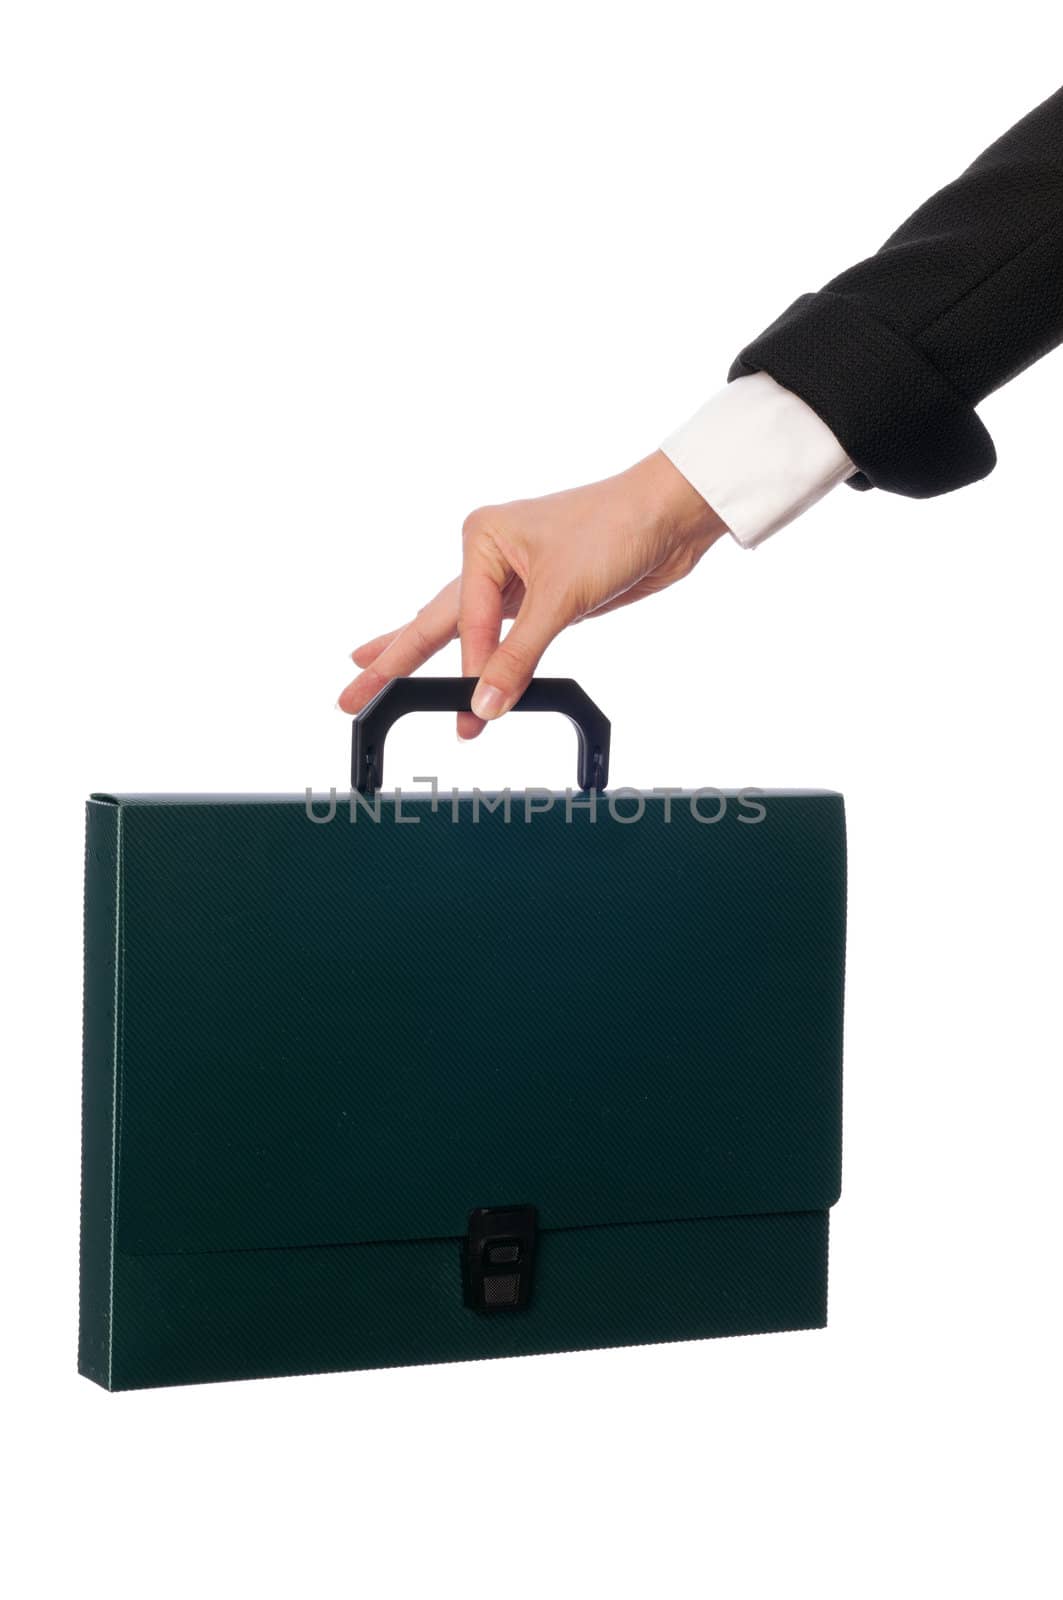 Suitcase with blank contracts for new employees